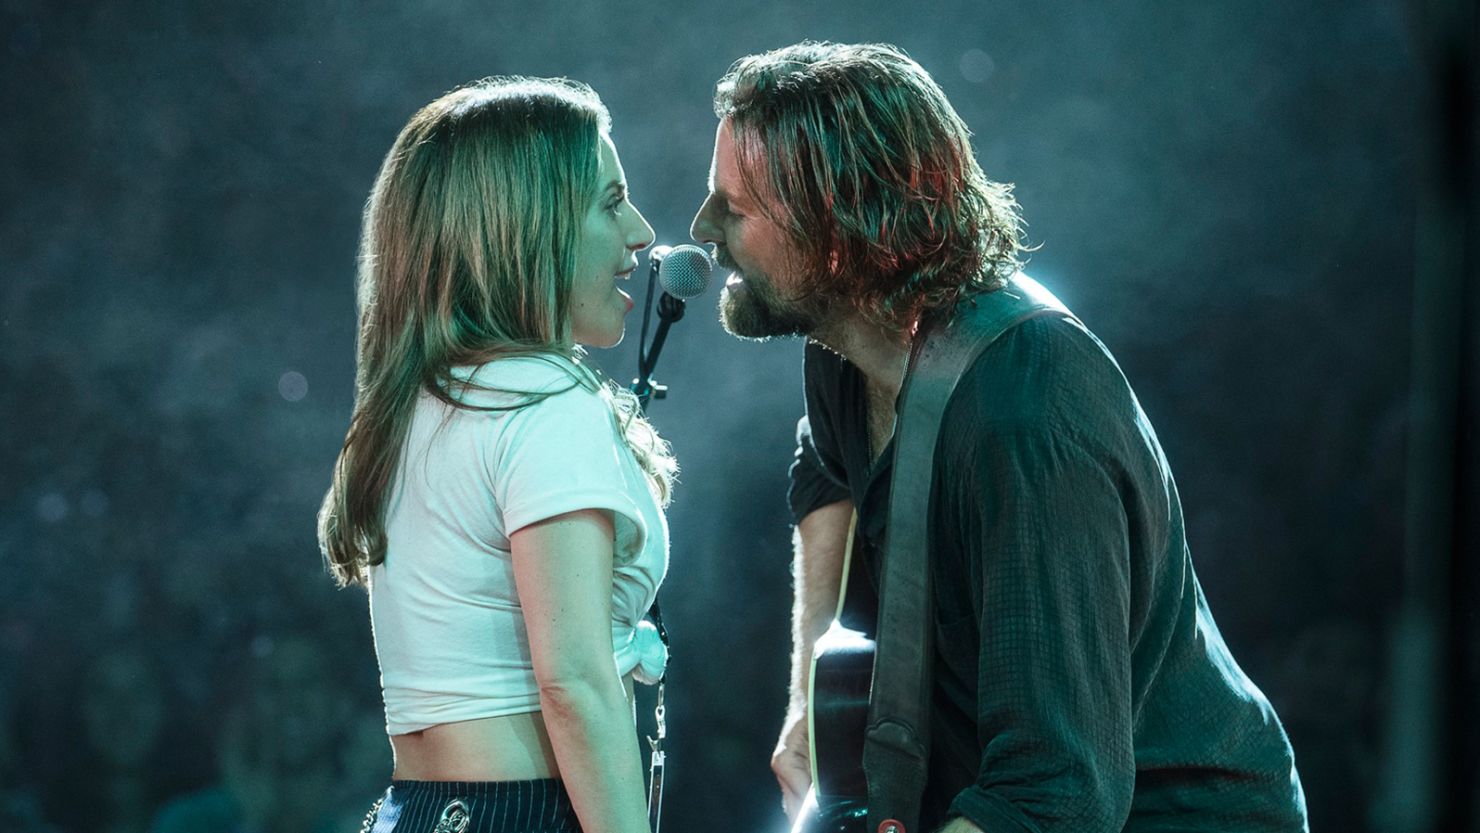 "A Star Is Born" starring Lady Gaga and Bradley Cooper opens this weekend.